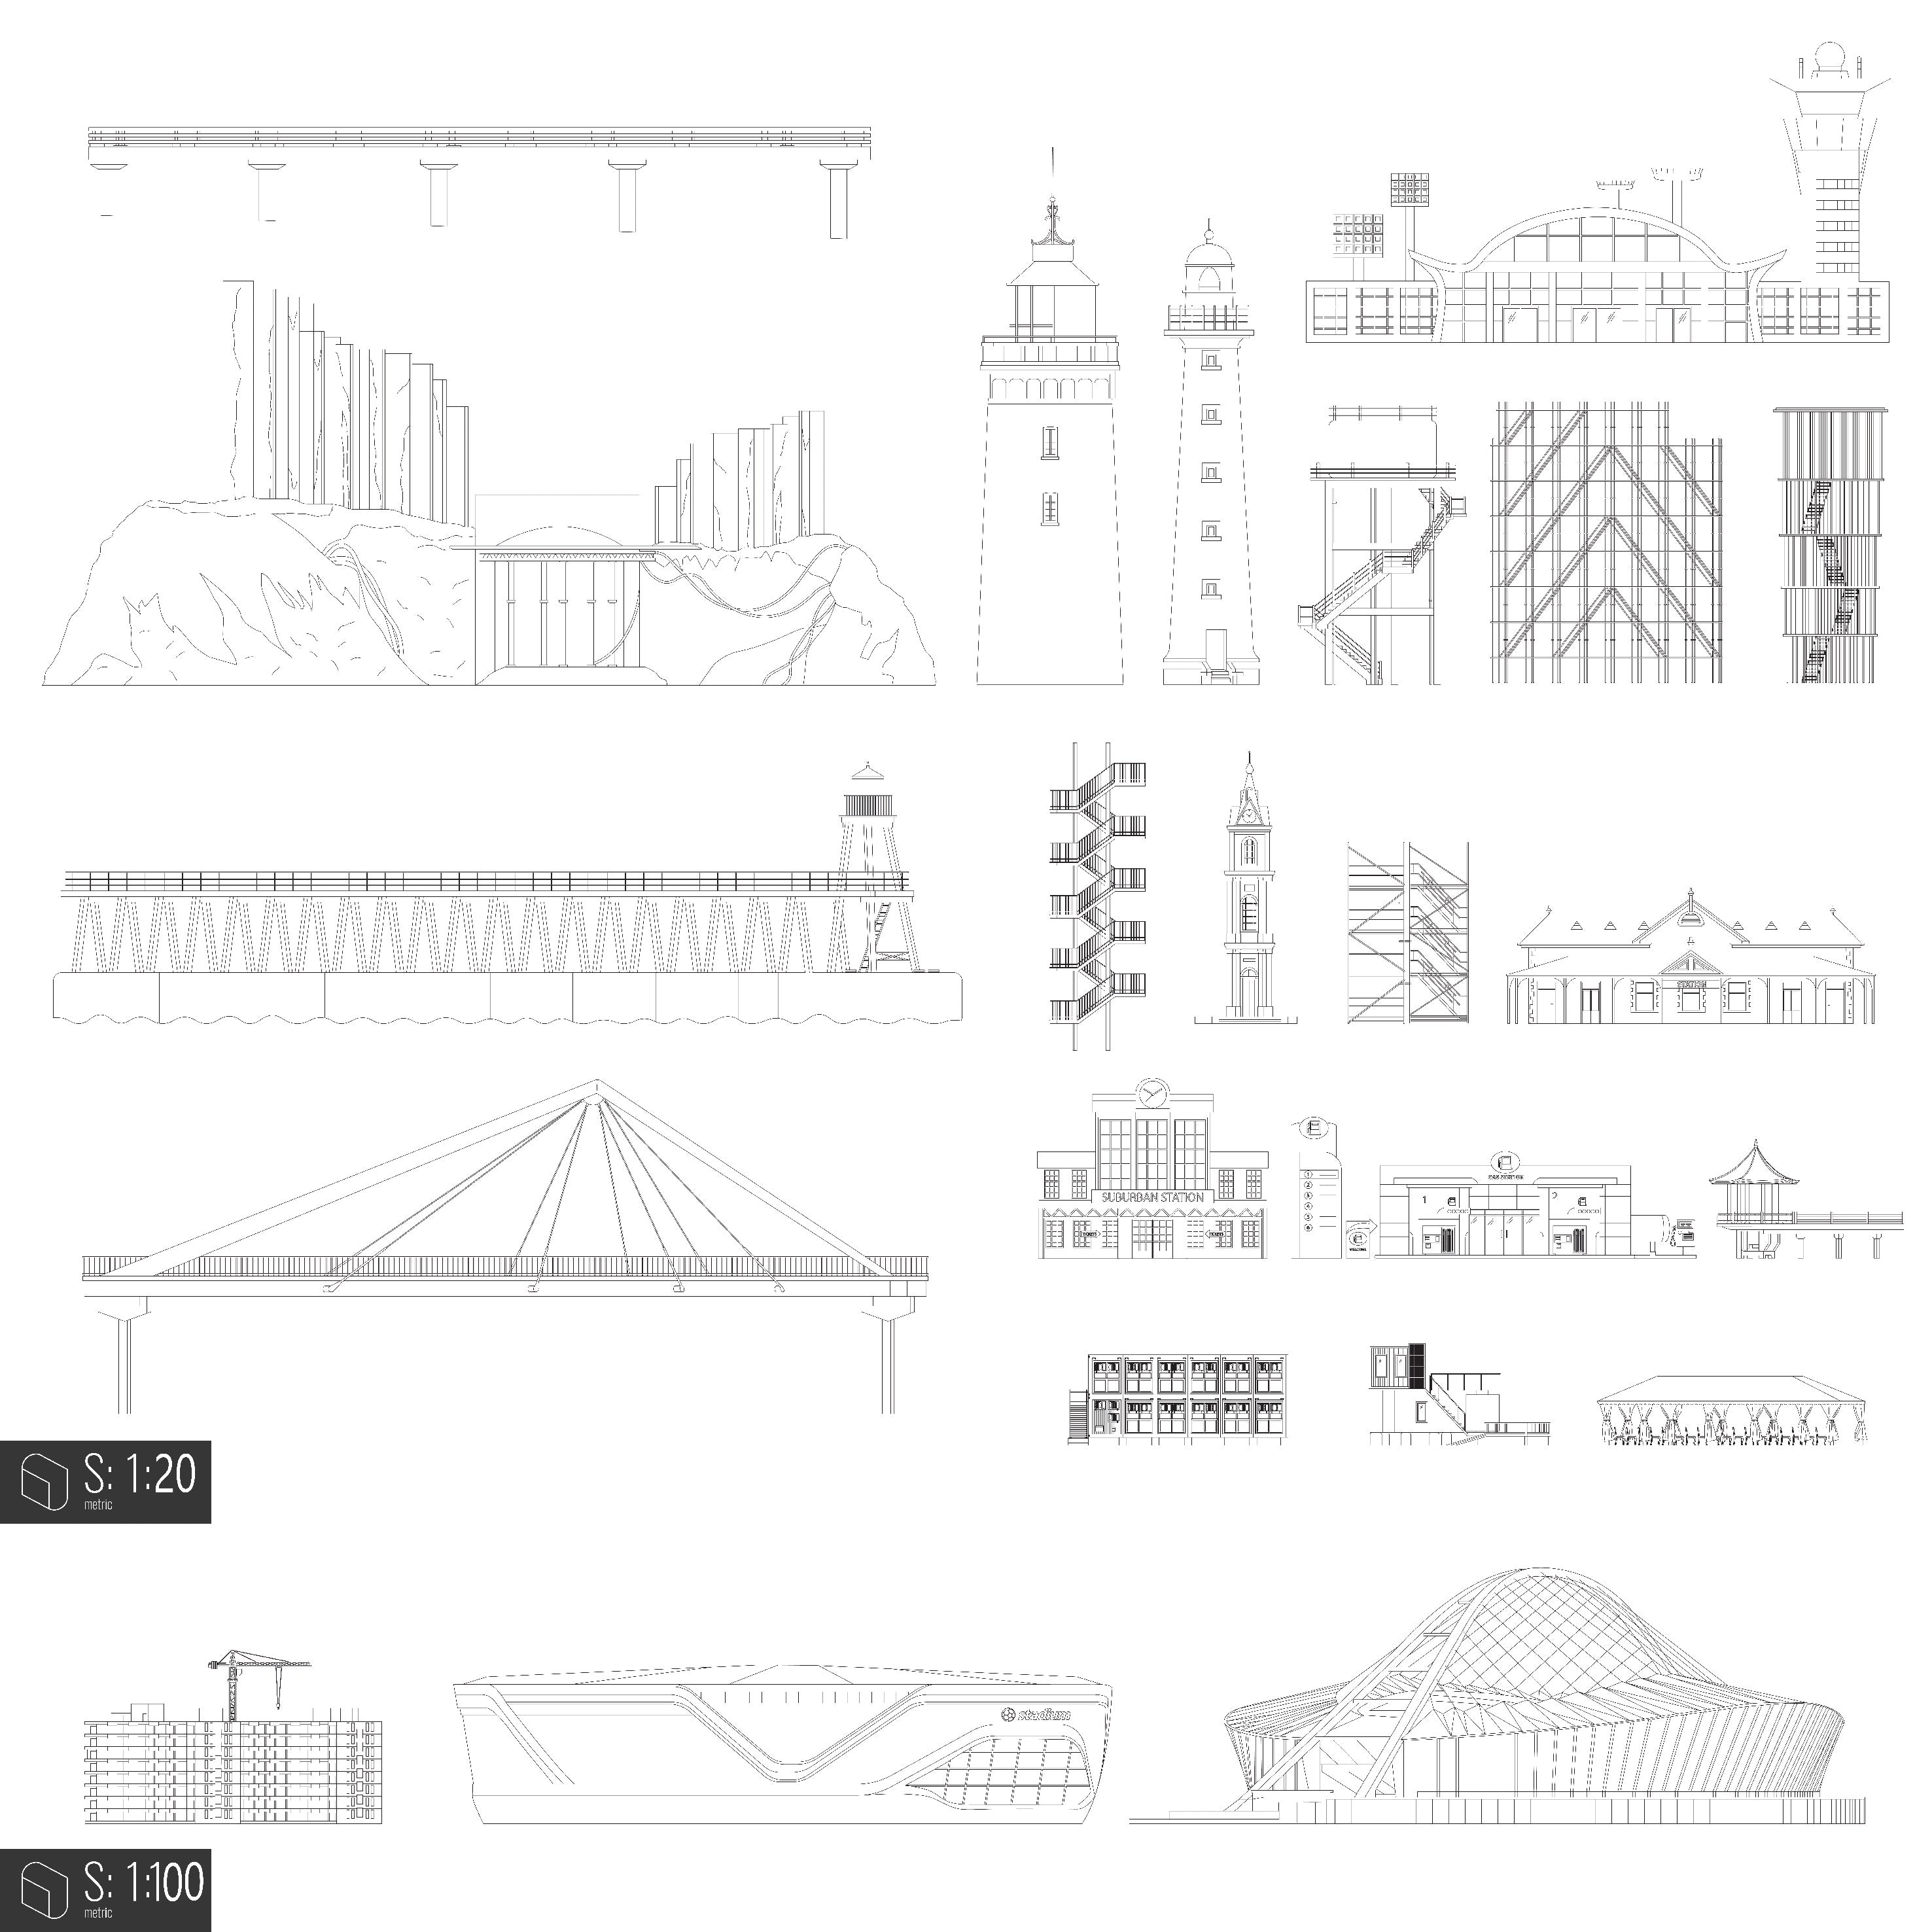 Cad Background Structures DWG | Toffu Co